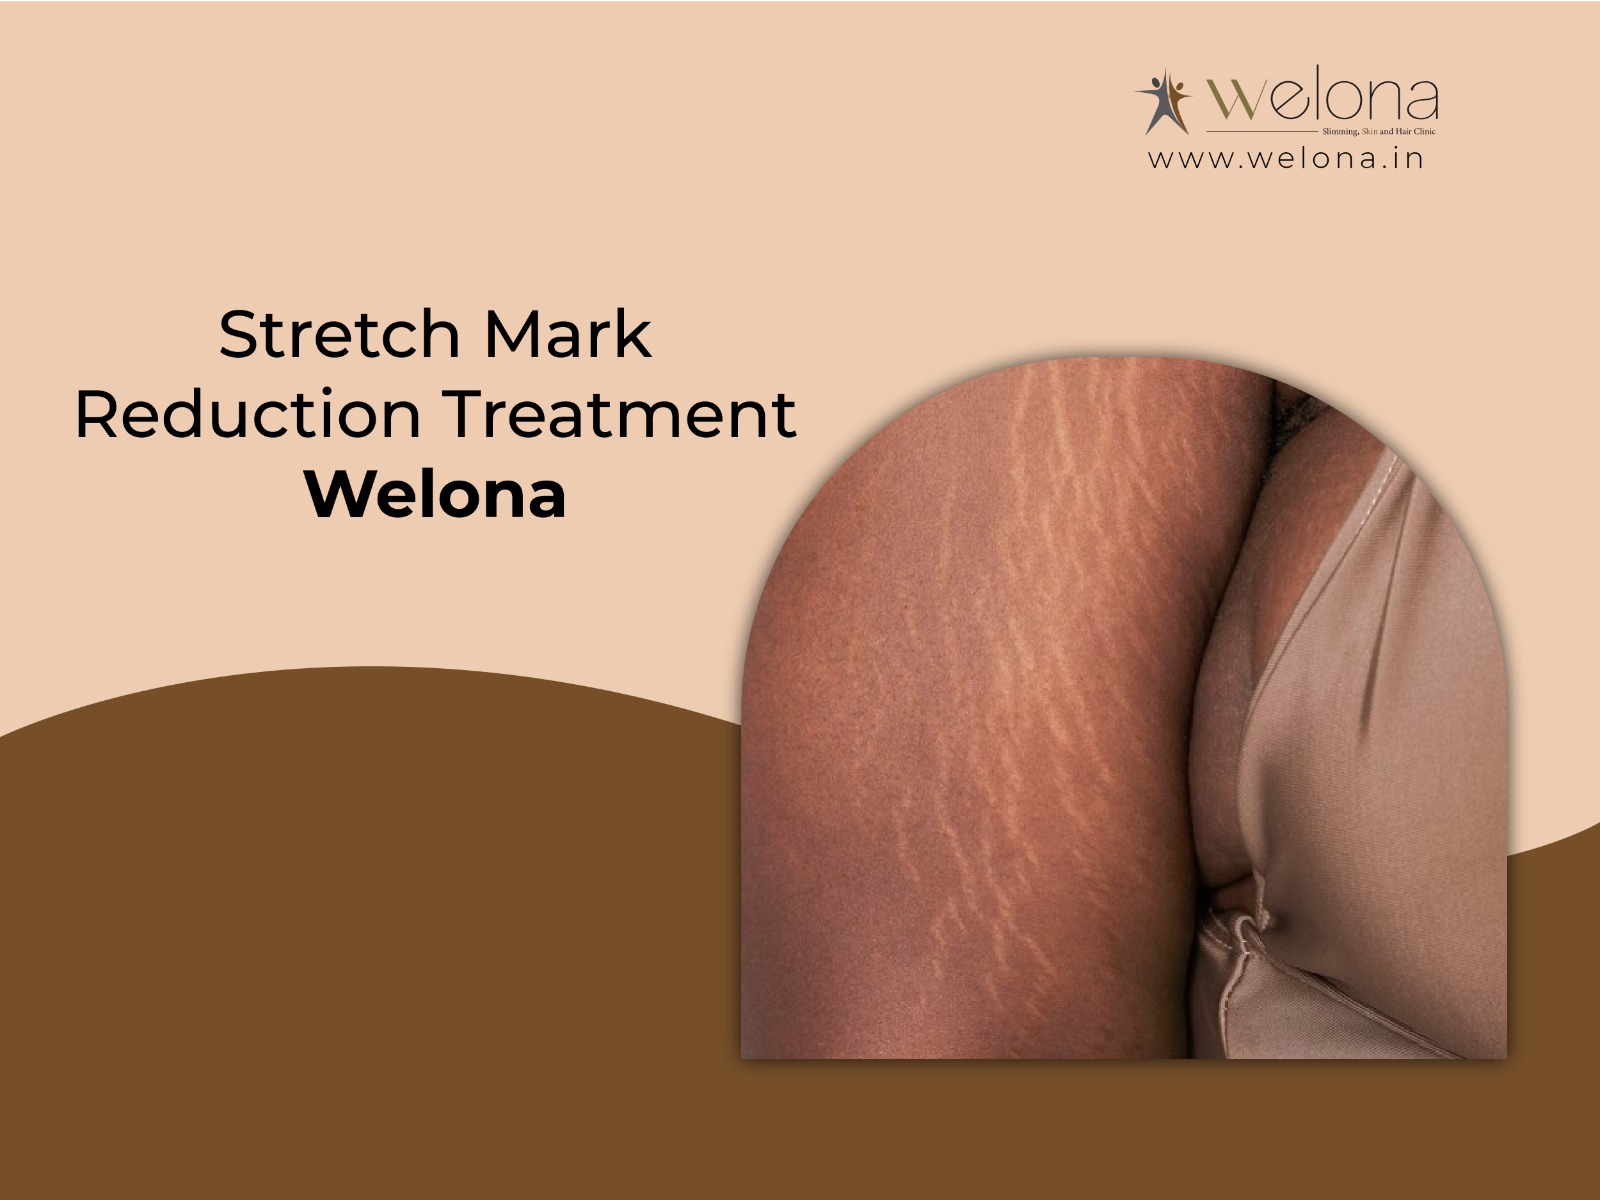 Stretch Marks Reduction Treatment From Welona